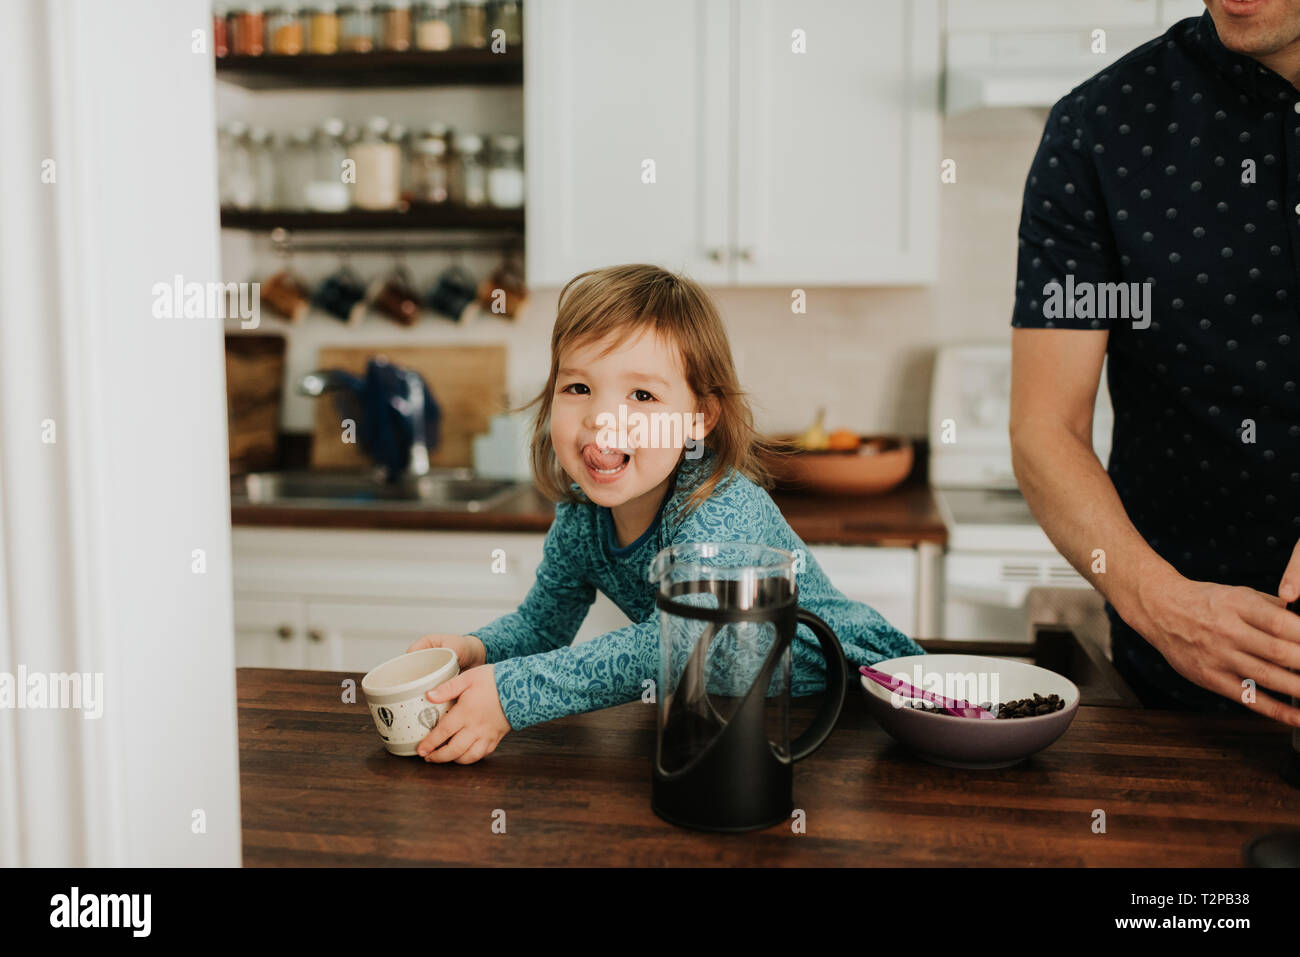 Female toddler and father at kitchen counter, portrait Stock Photo